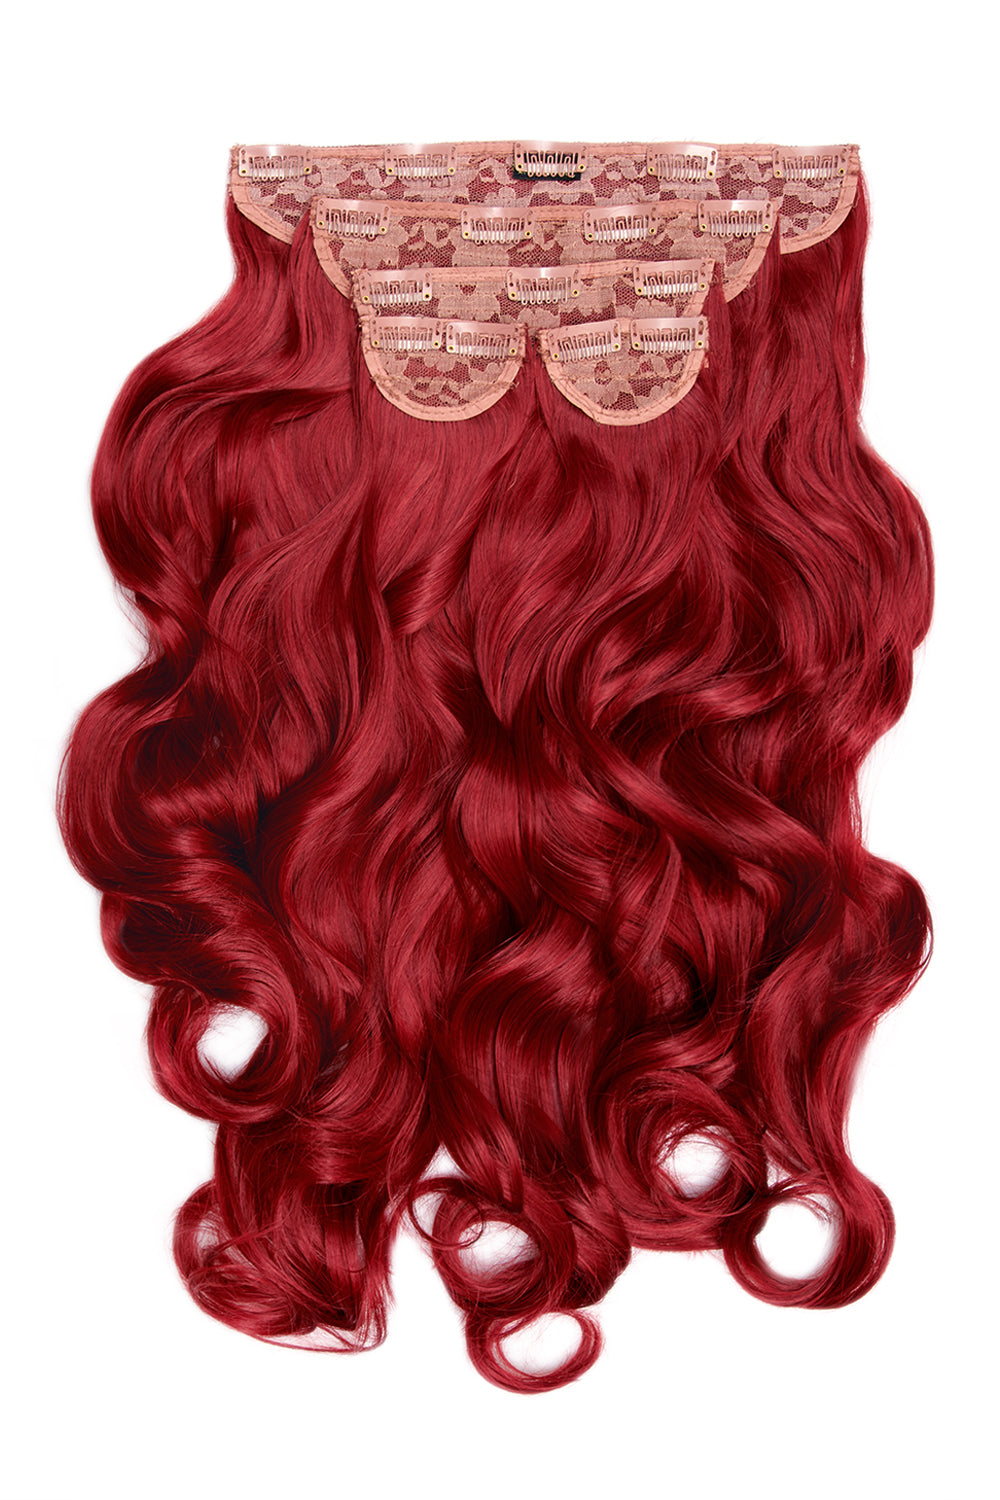 Super Thick 22" 5 Piece Curly Clip In Hair Extensions - Ruby Red